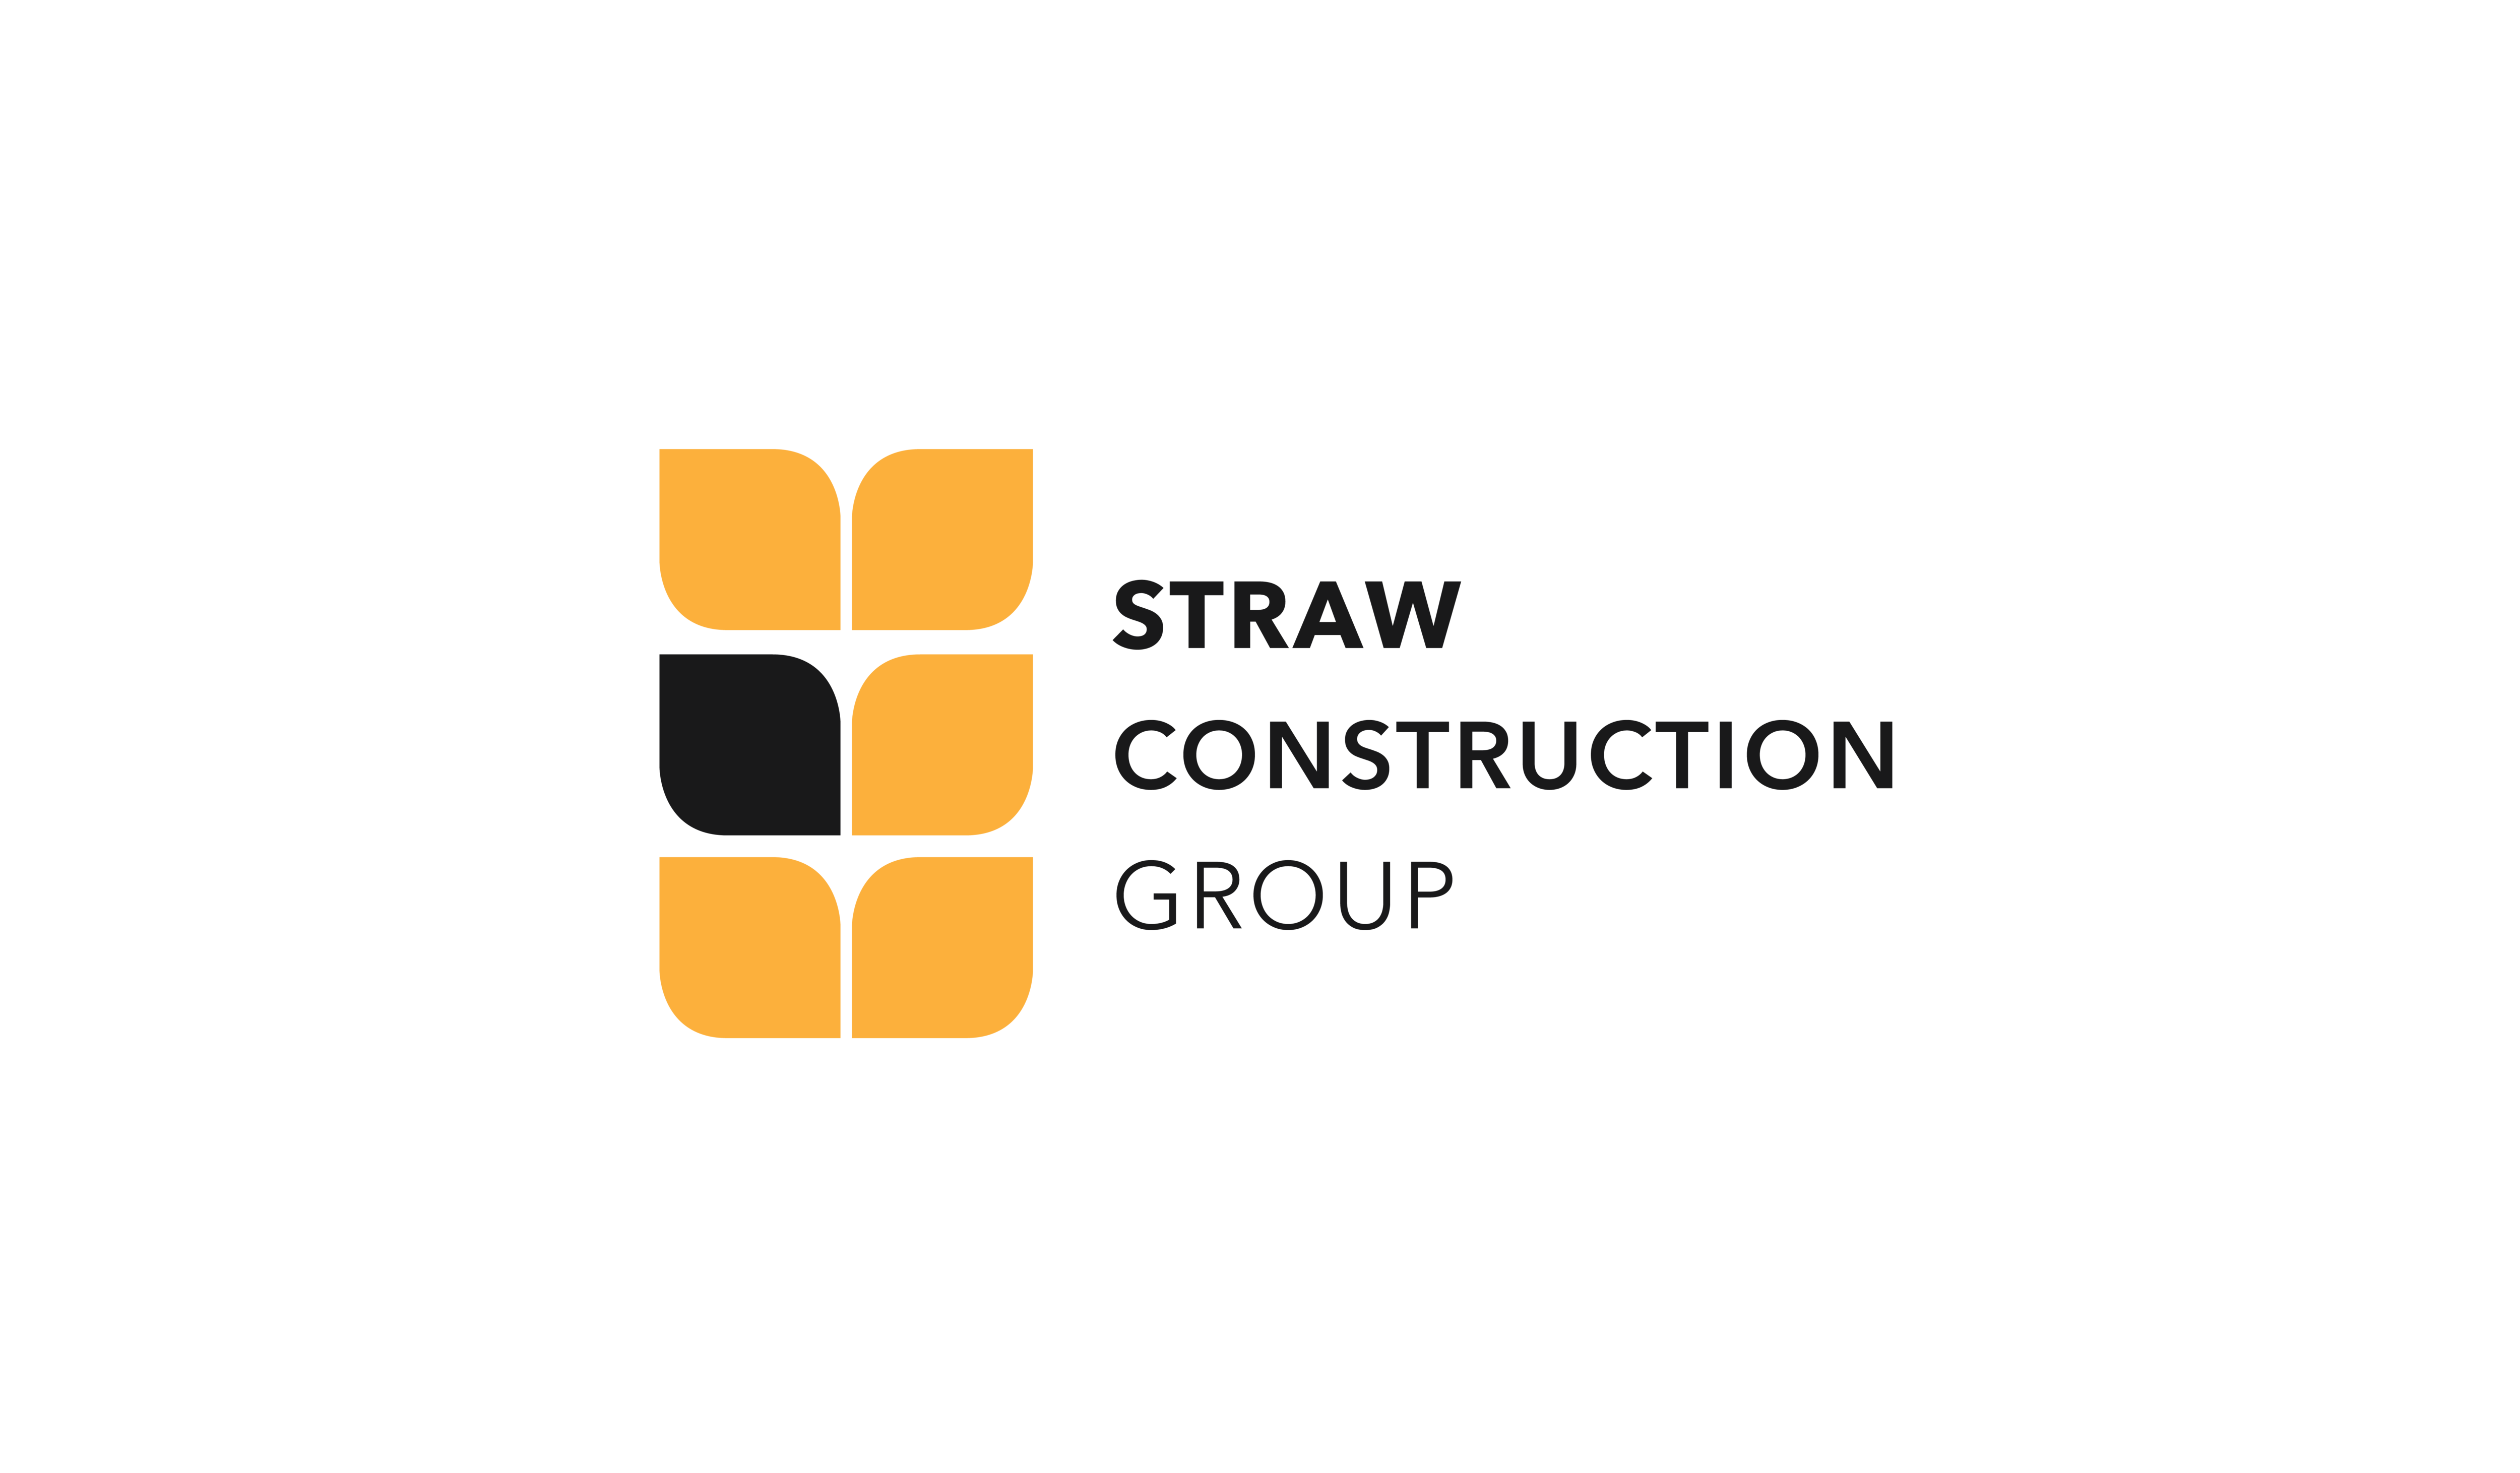 STRAW CONSTRUCTION GROUP